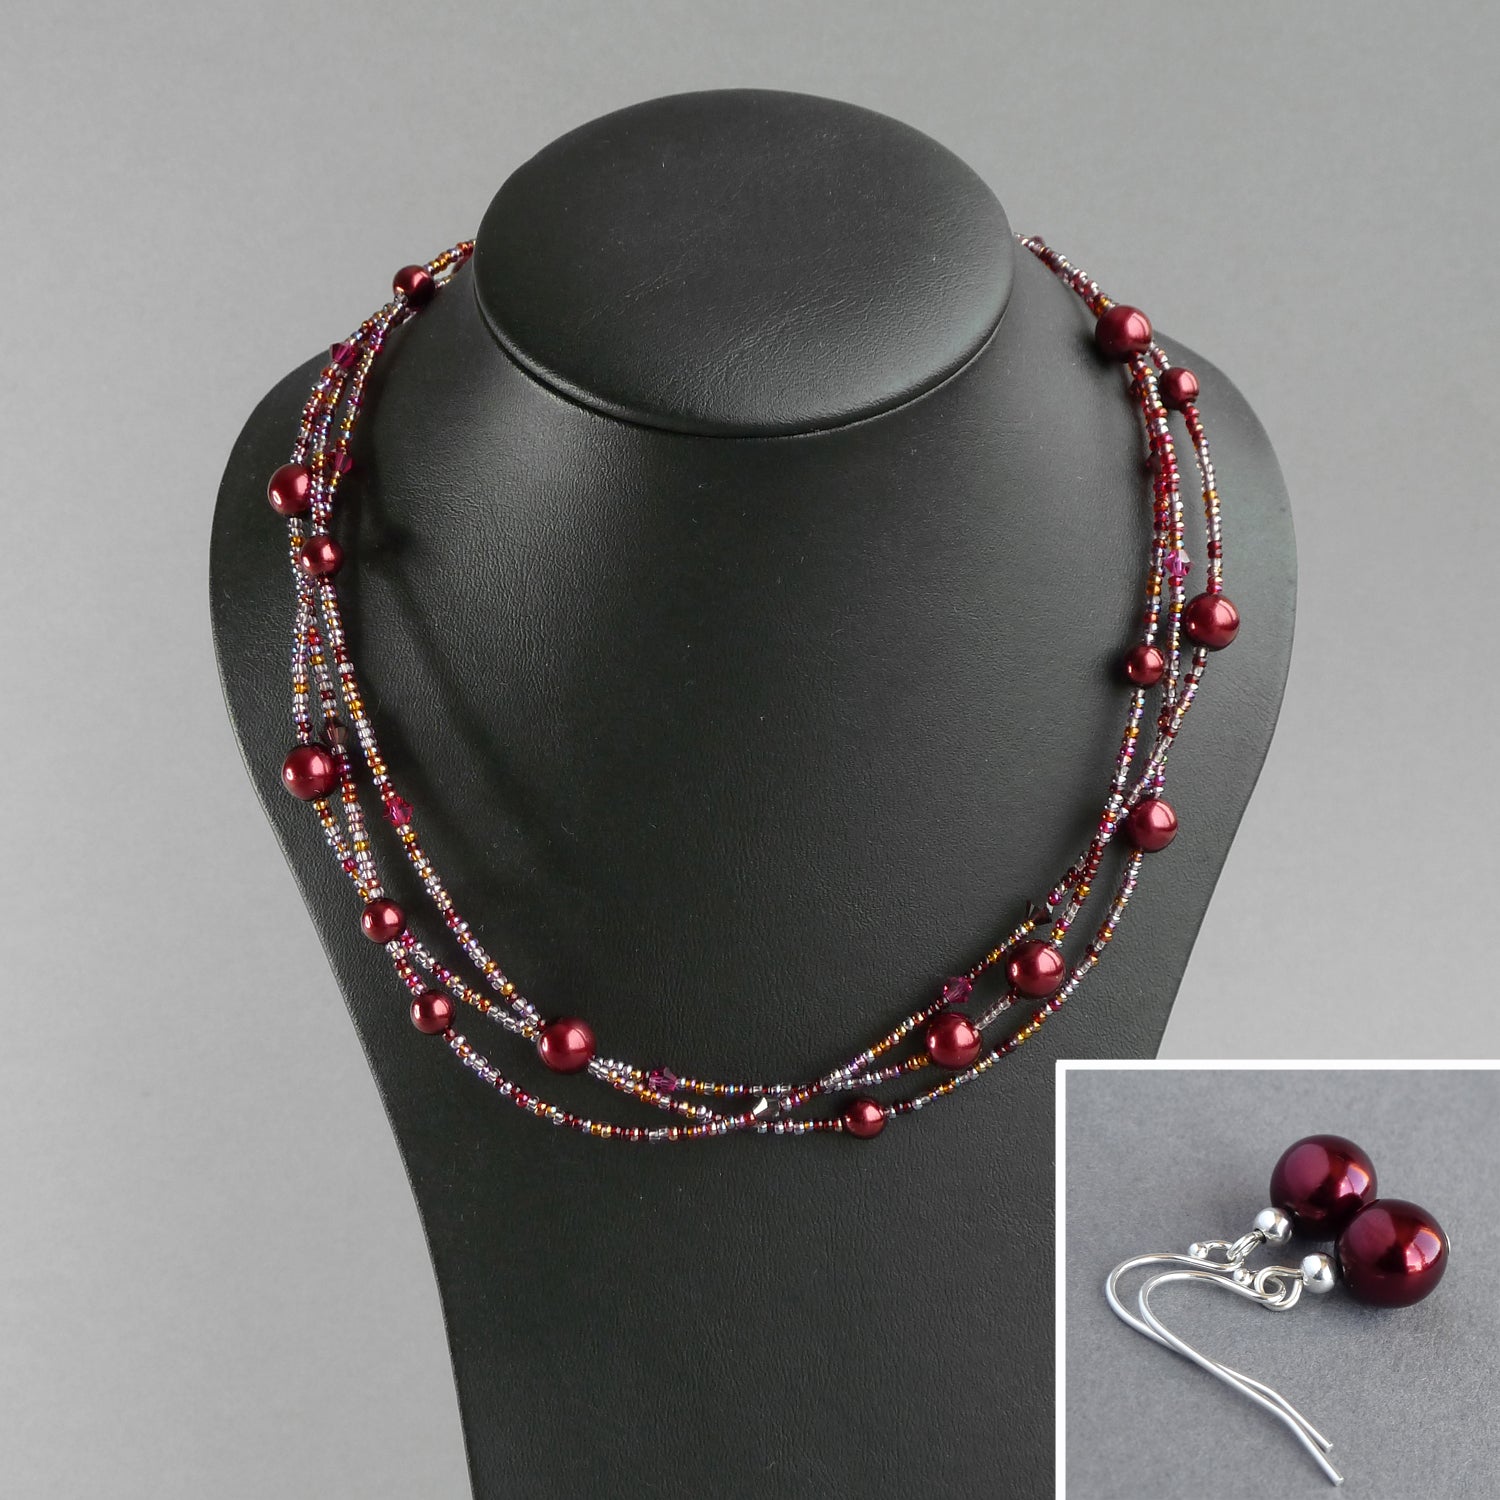 Burgundy necklace and earrings set